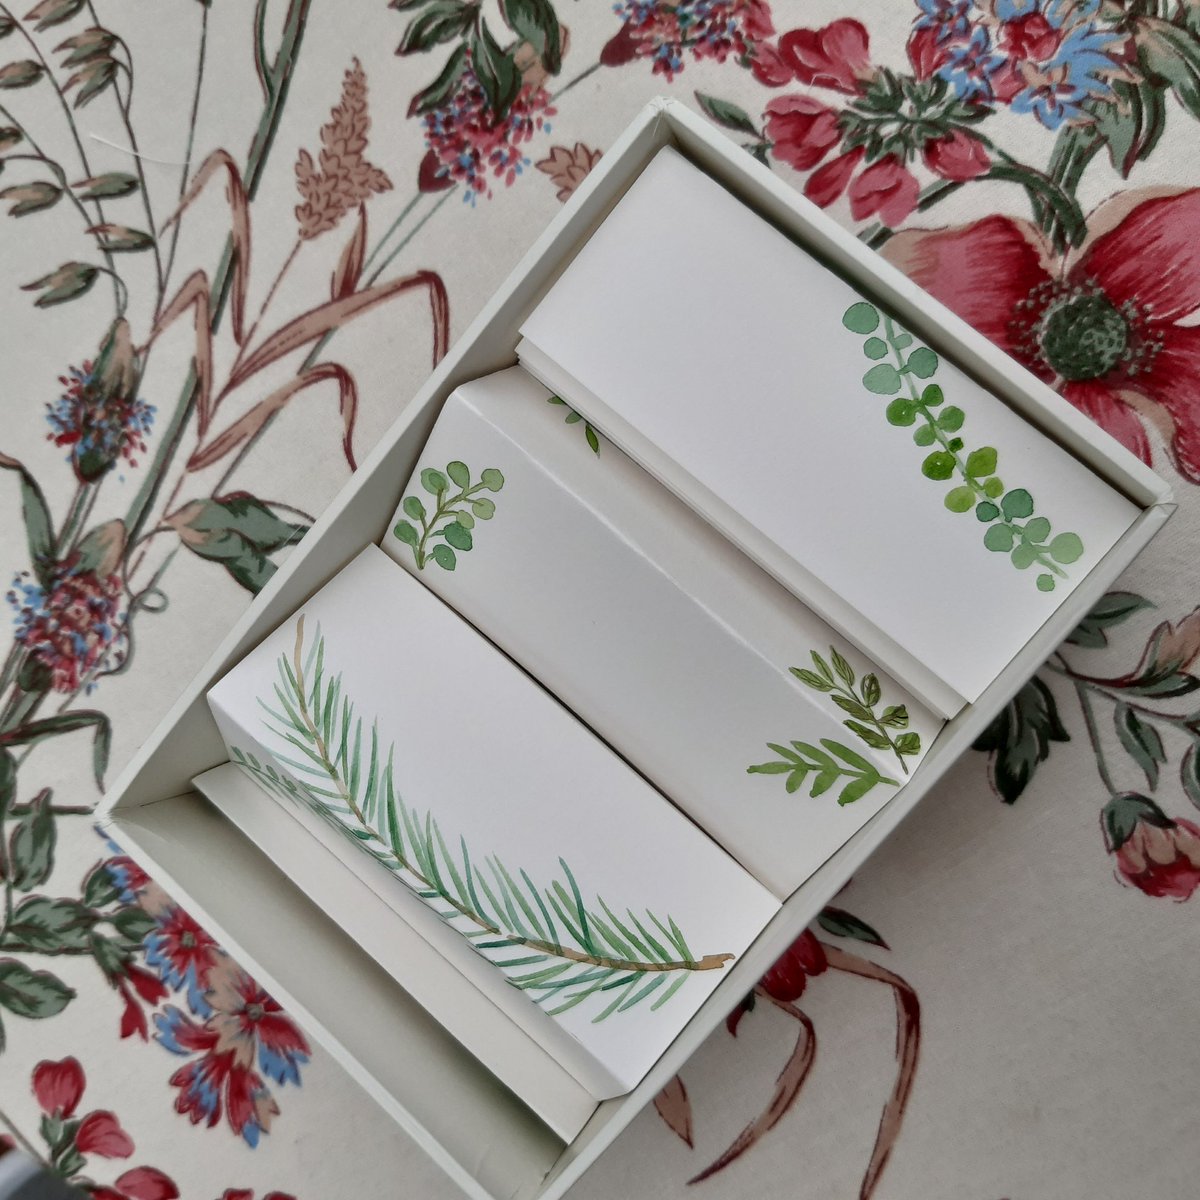 What do you think of this presentation of the wedding place cards?